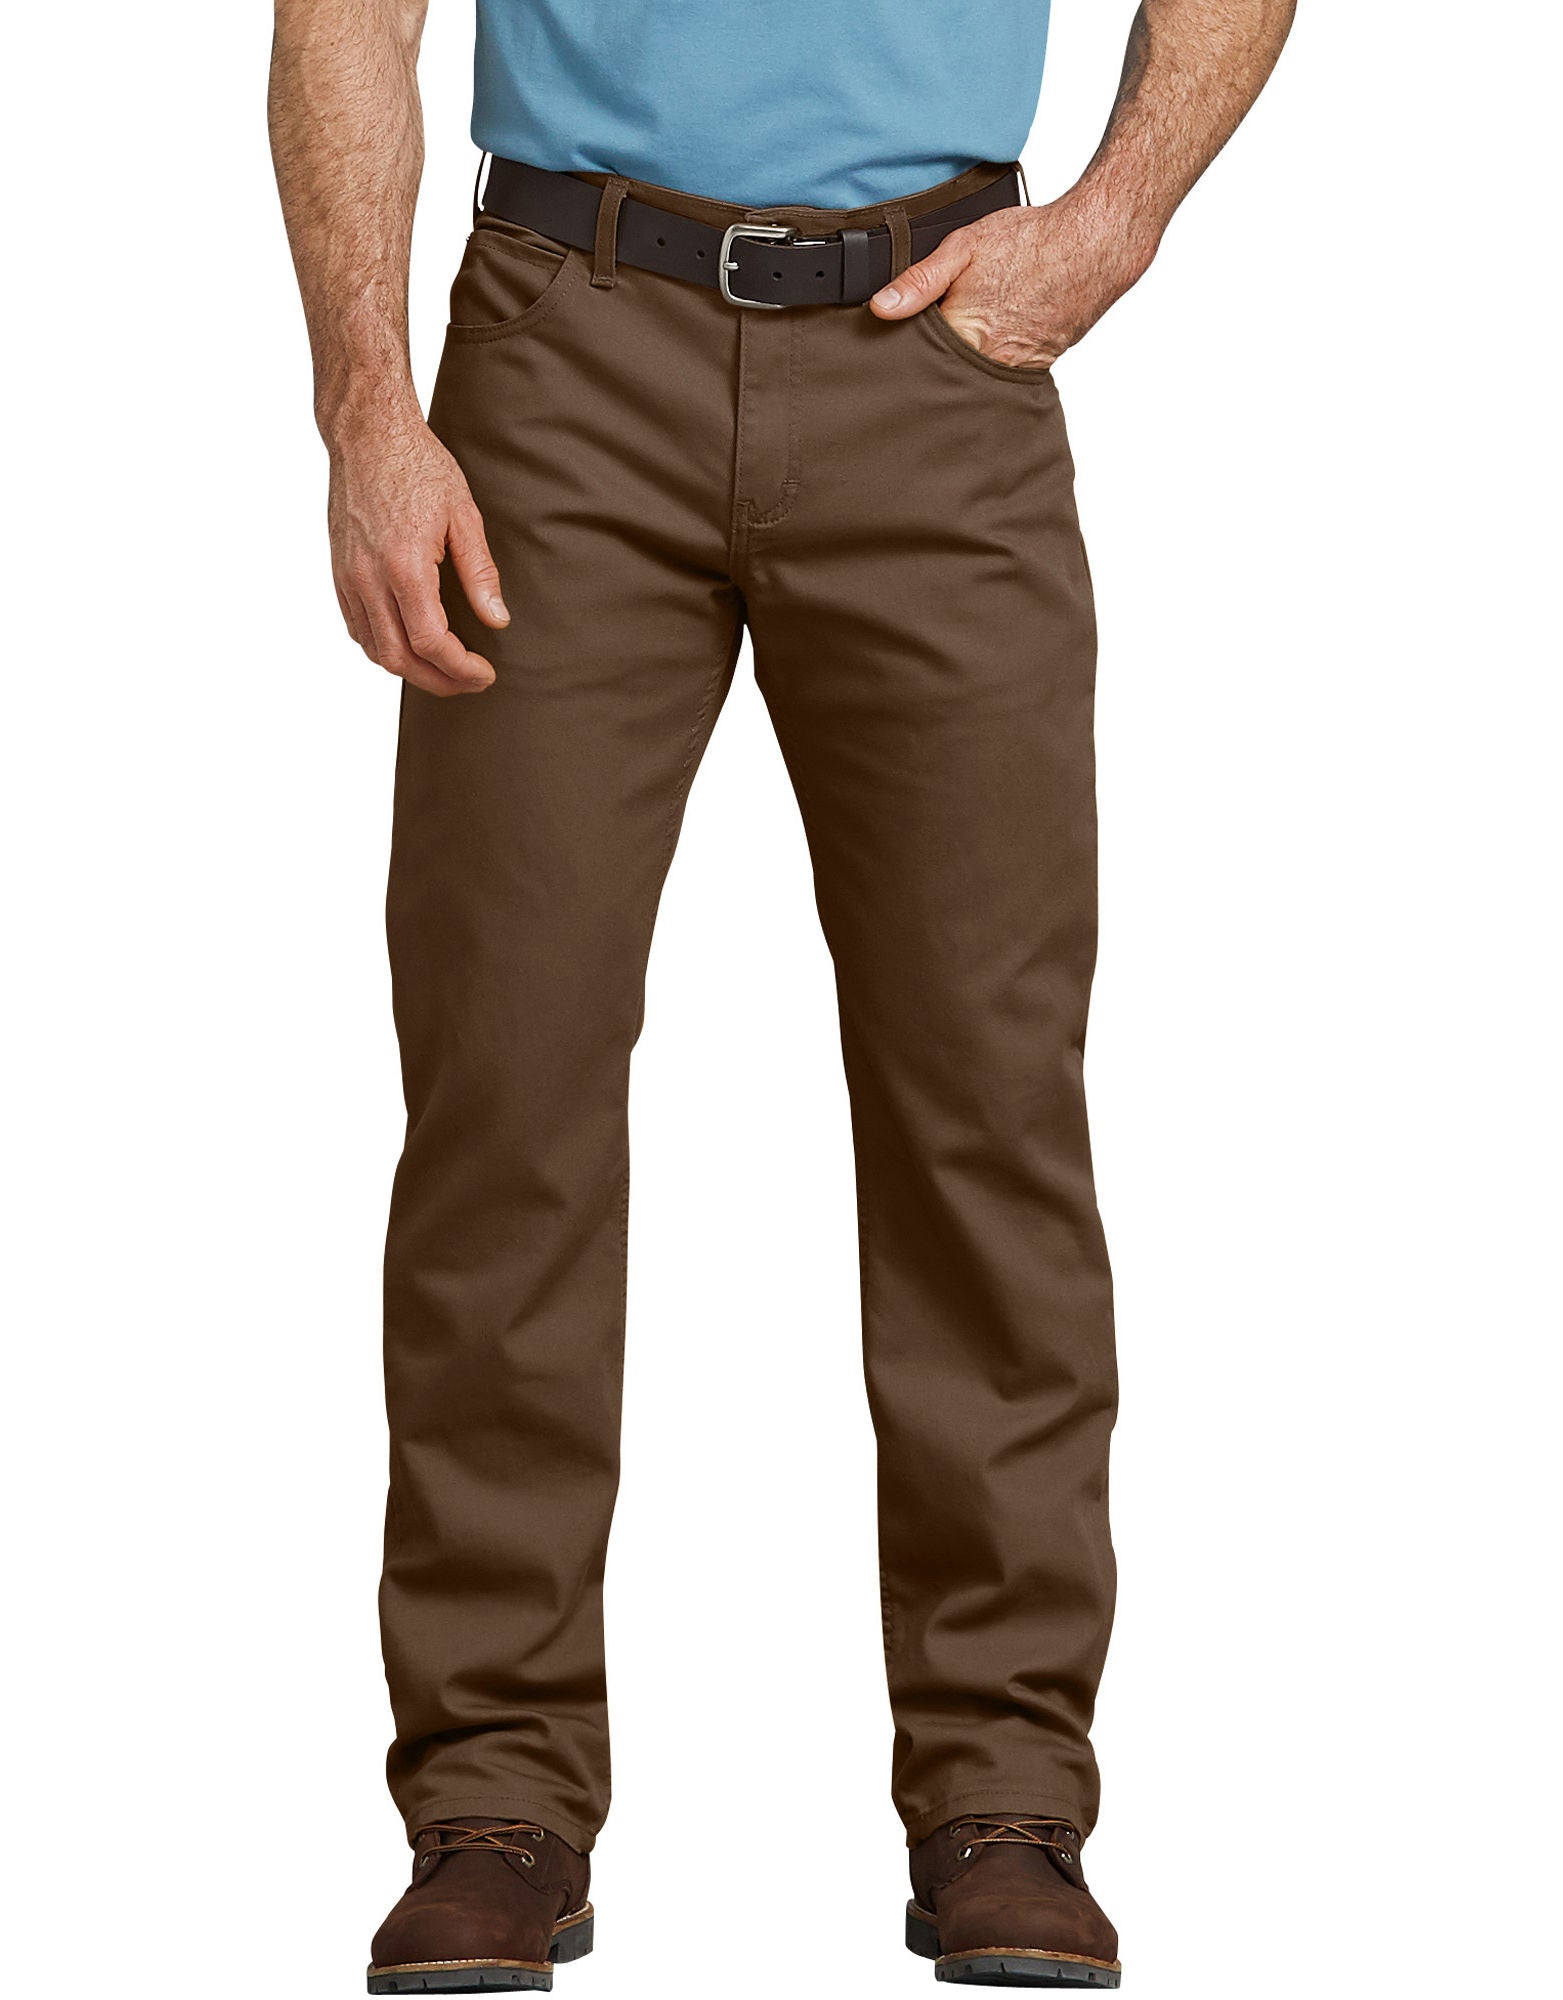 Dickies Men's Duck 5 Pocket Pants, Stonewashed Timber - Mucksters ...